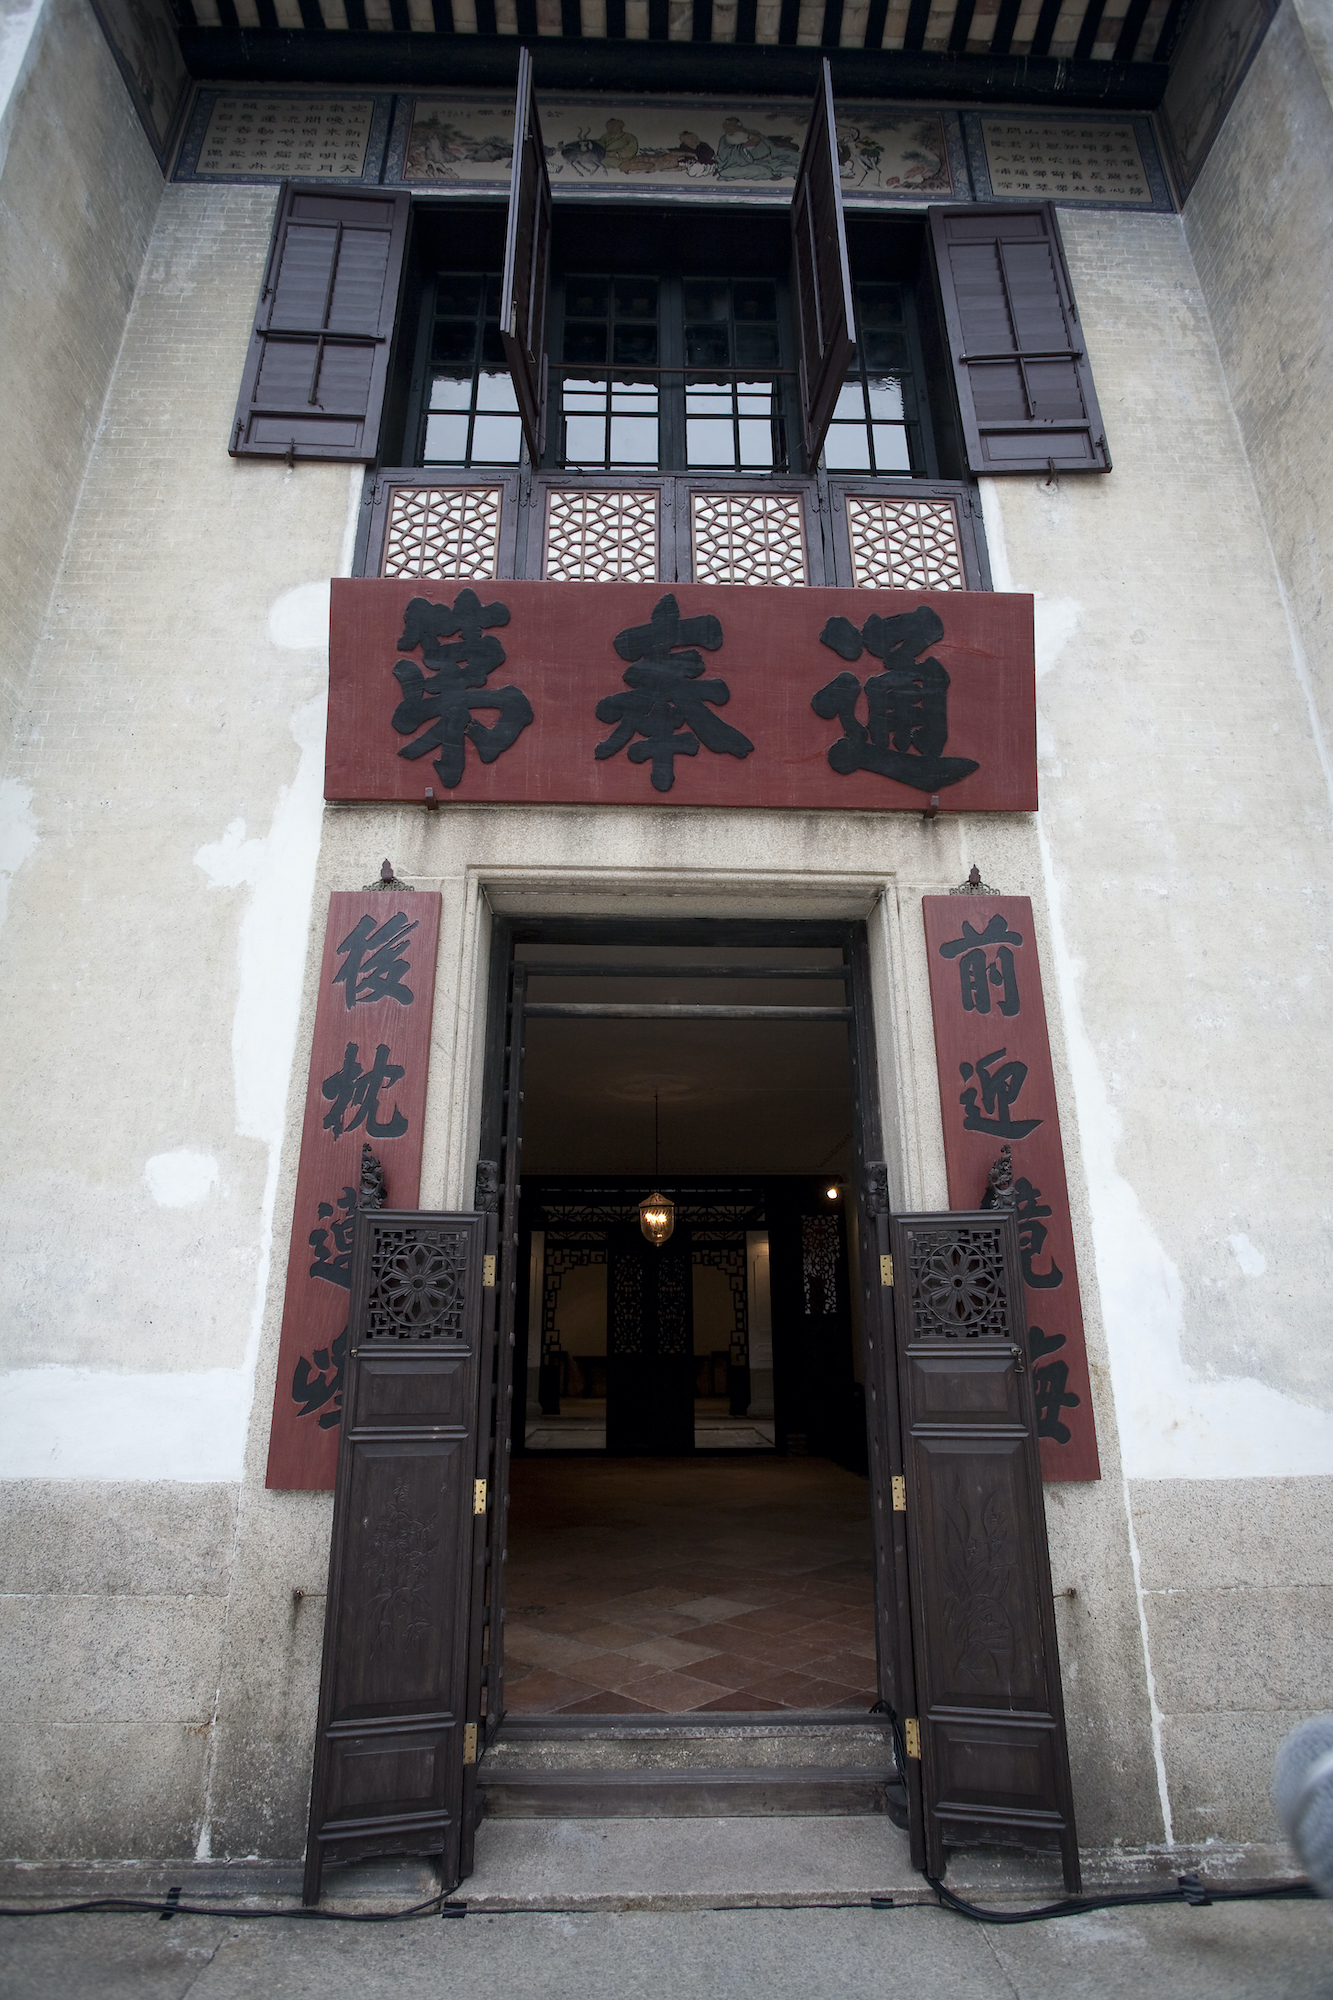 Built by Zheng Guanying’s father, Wenrui, the ancestral mansion is one of the best preserved examples of the Lingnan (southern Chinese) style of architectural design in existence